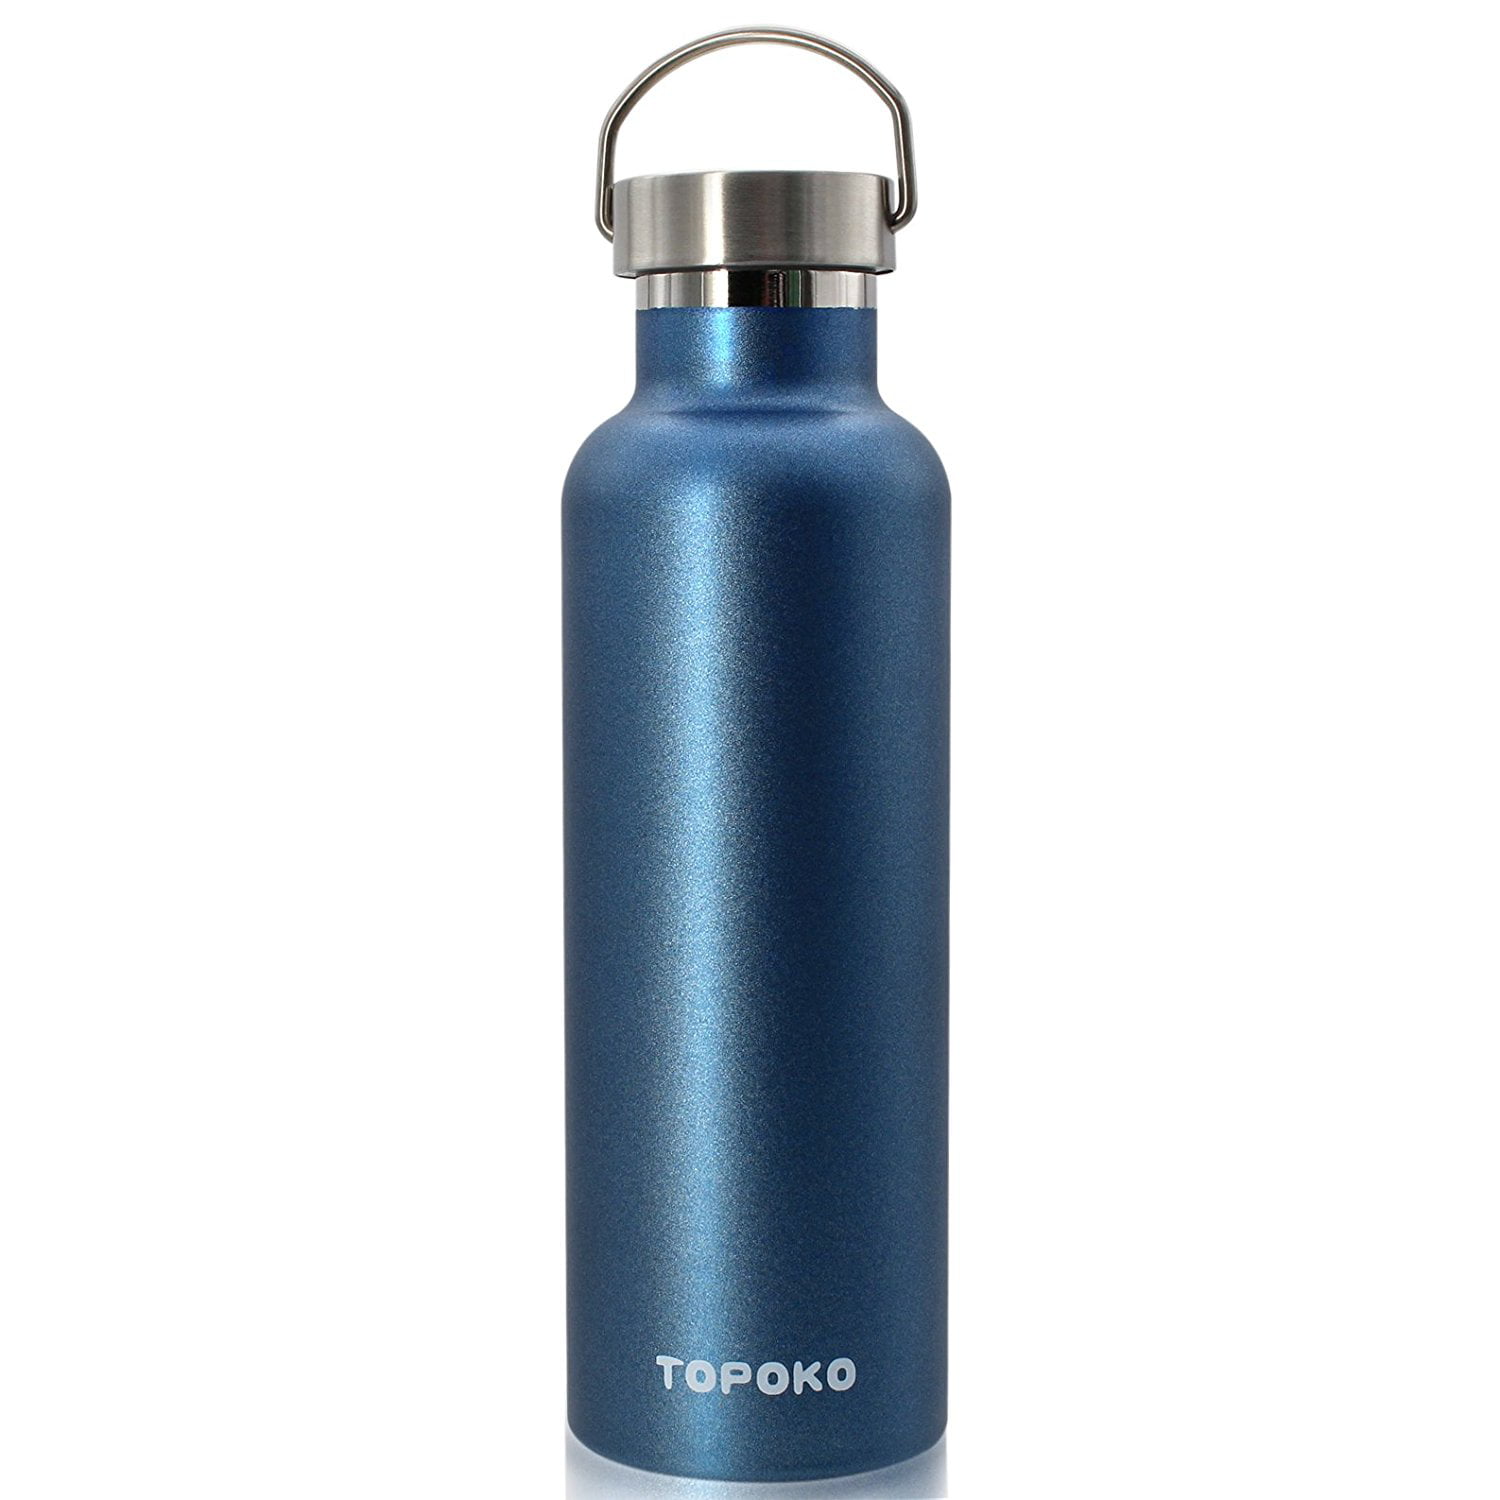 w/ Hinged Cap HF-002D NEW Stainless Steel Flask 3.5 oz 